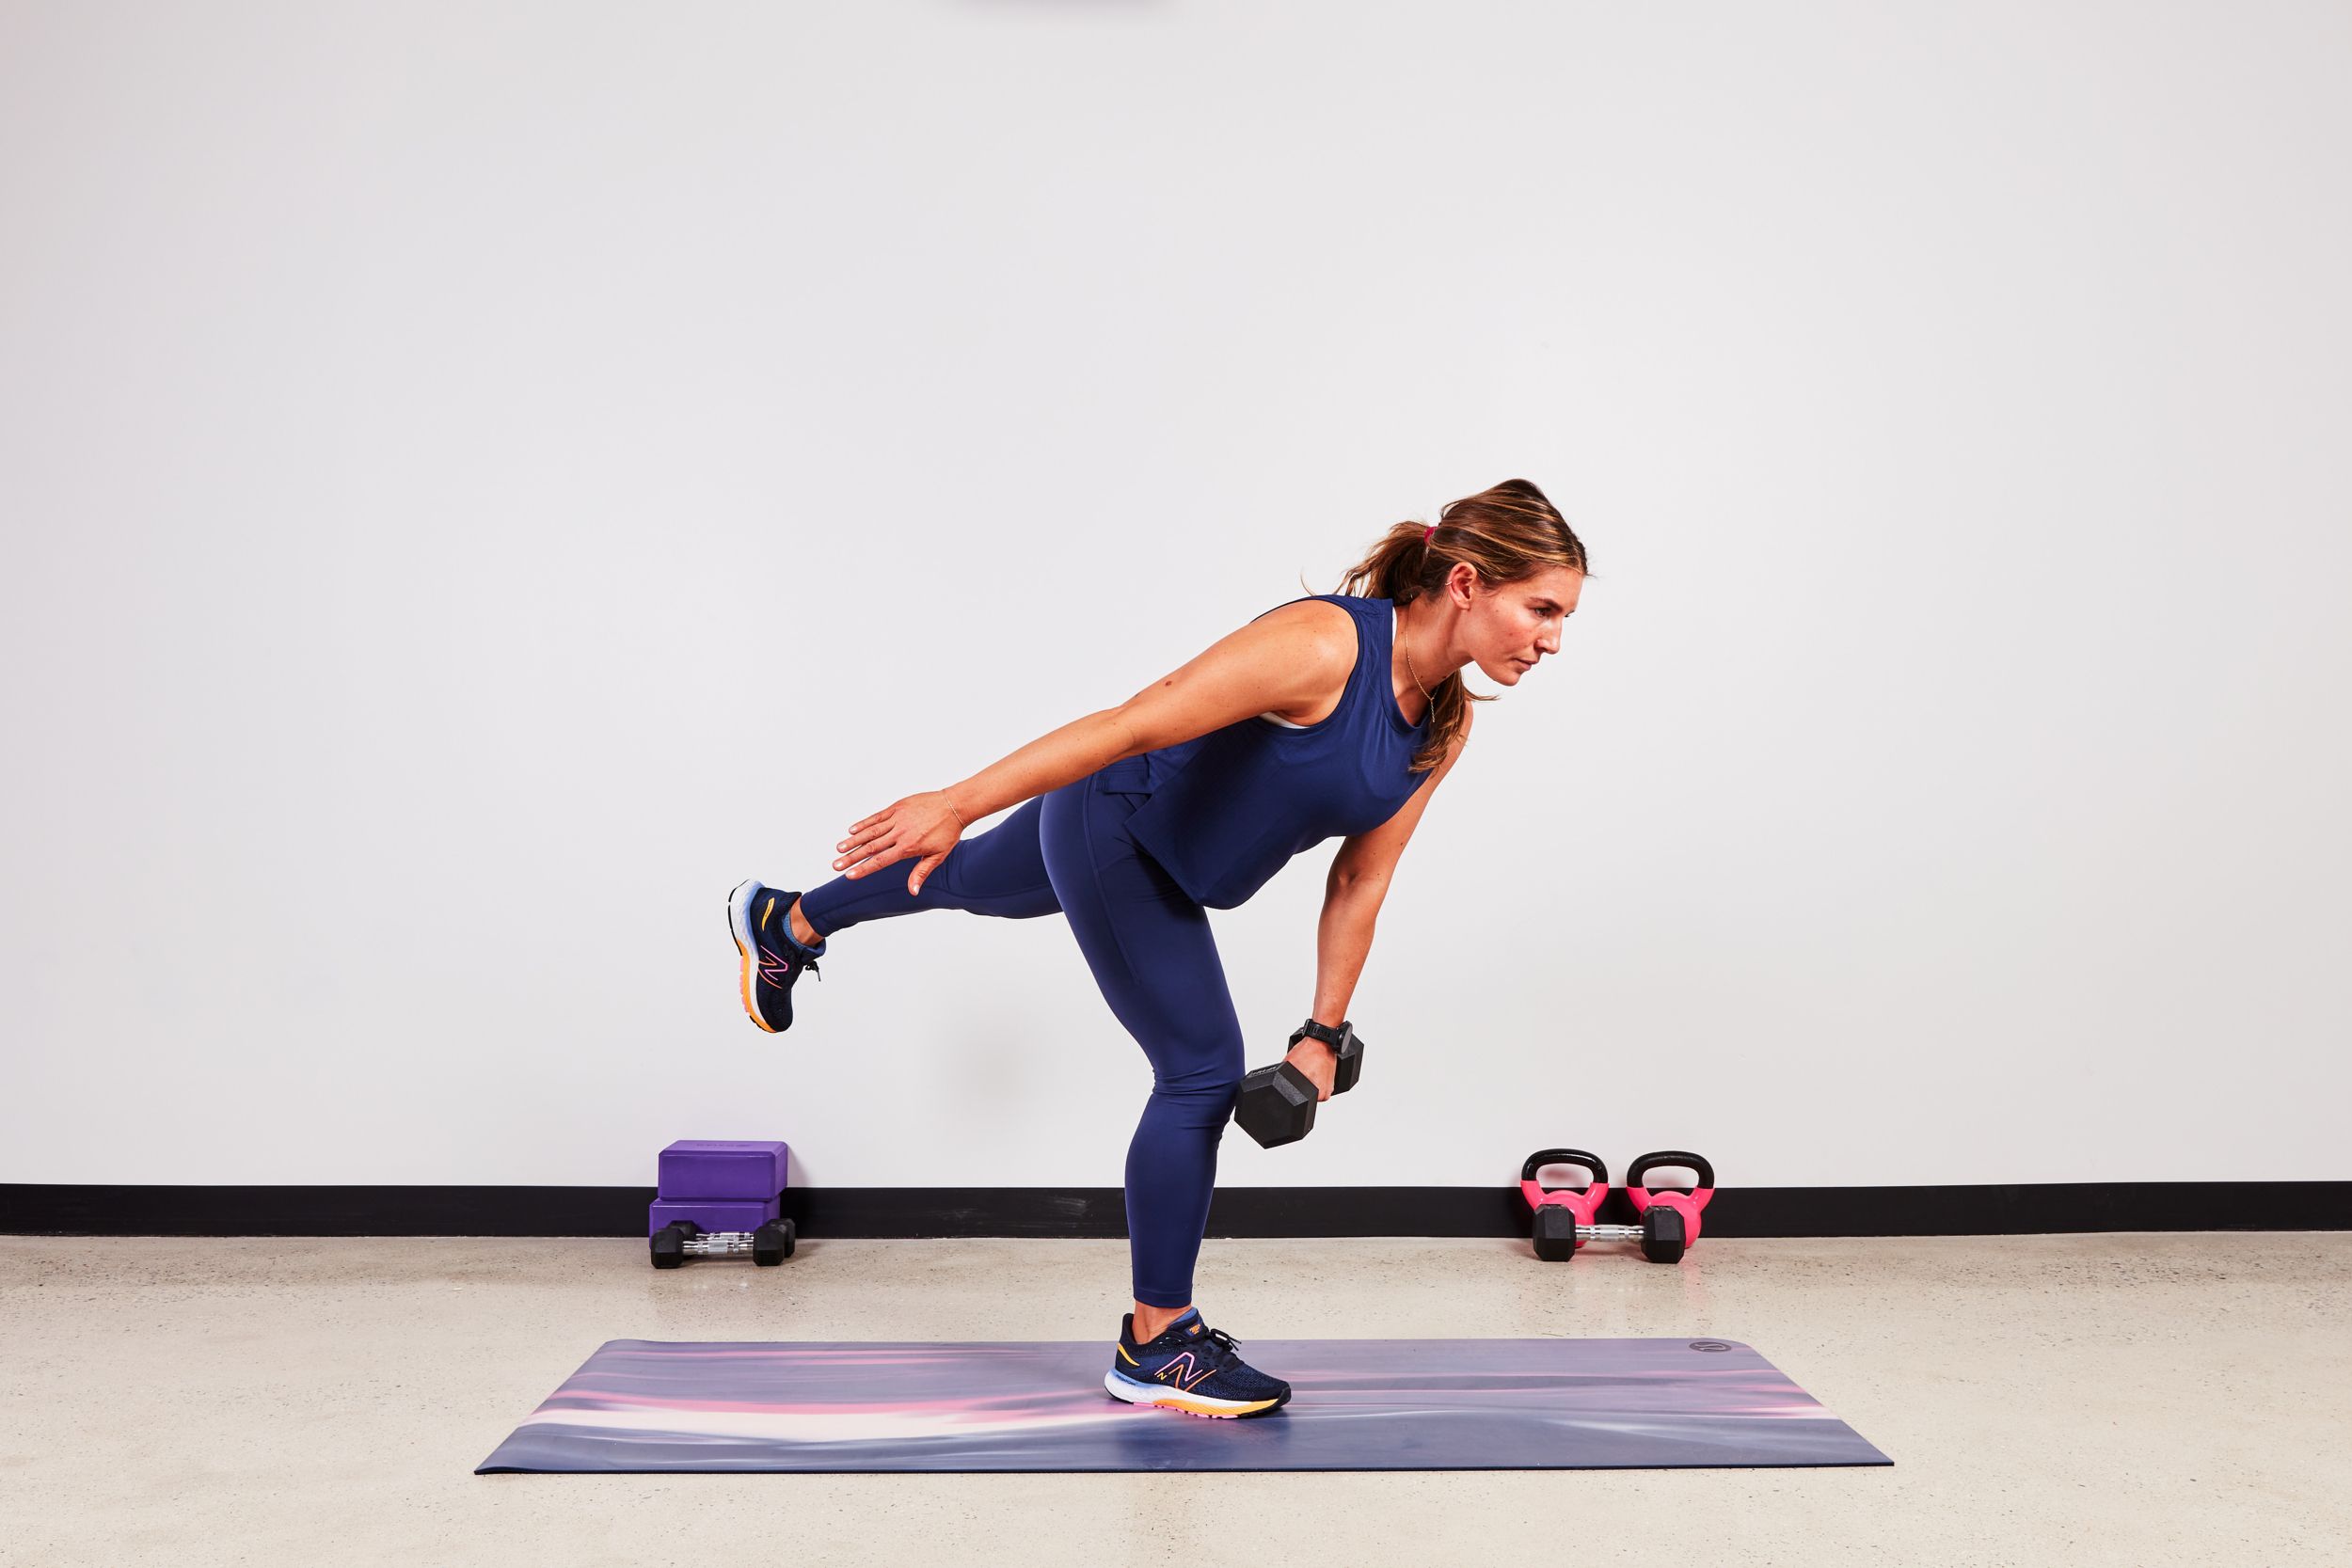 11 Single-Leg Exercises to Build Strength and Balance—And Work